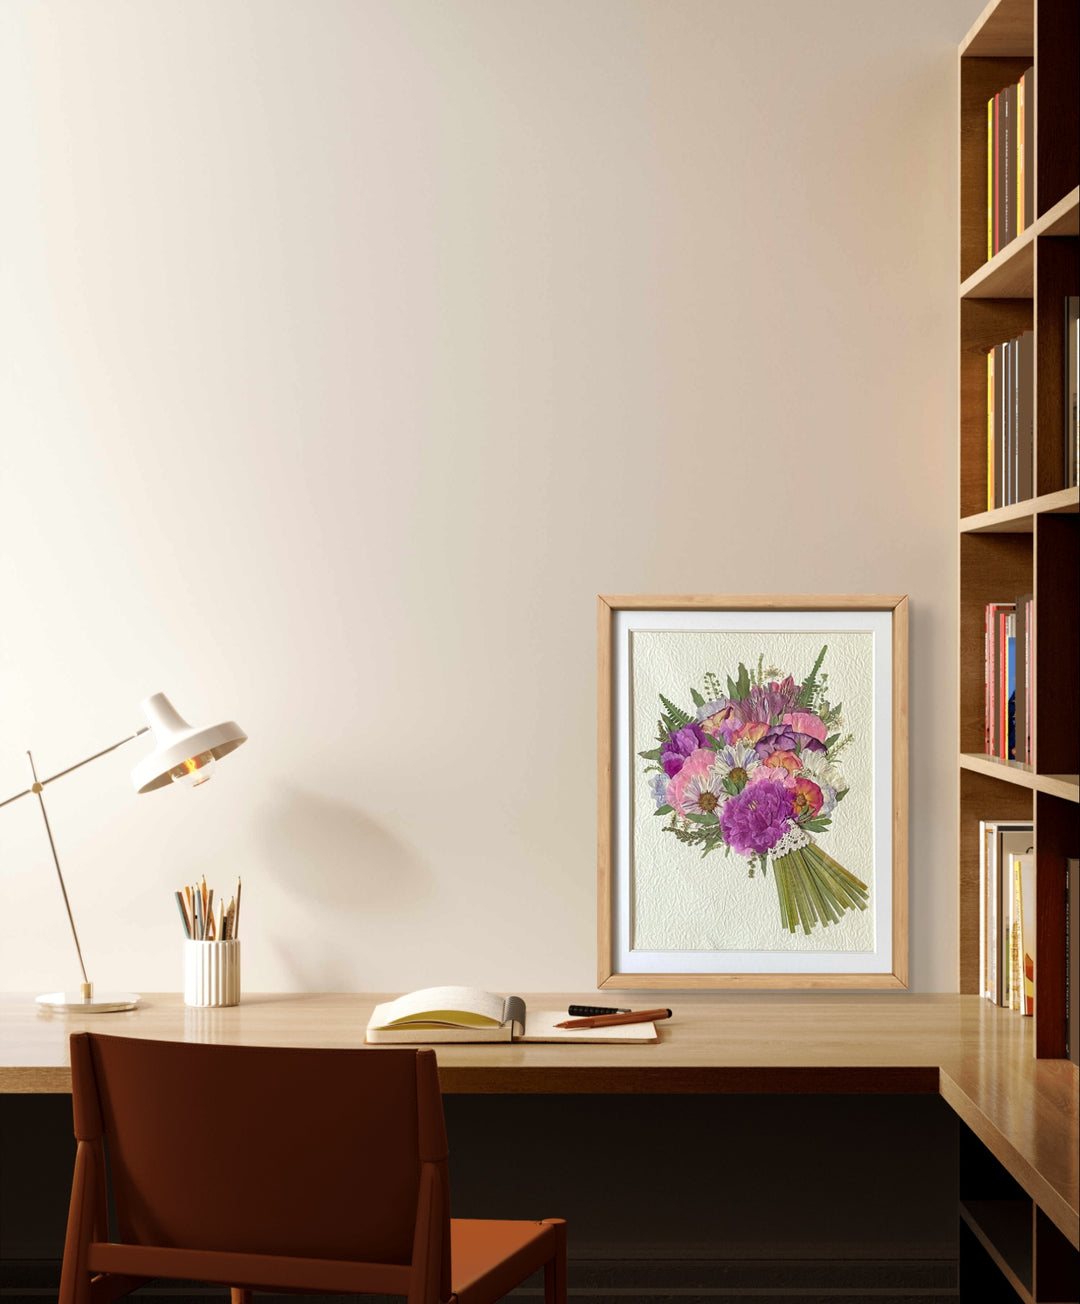 11 inches width 12.5 inches height pressed flower frame art that is purple style stands on the wood table.